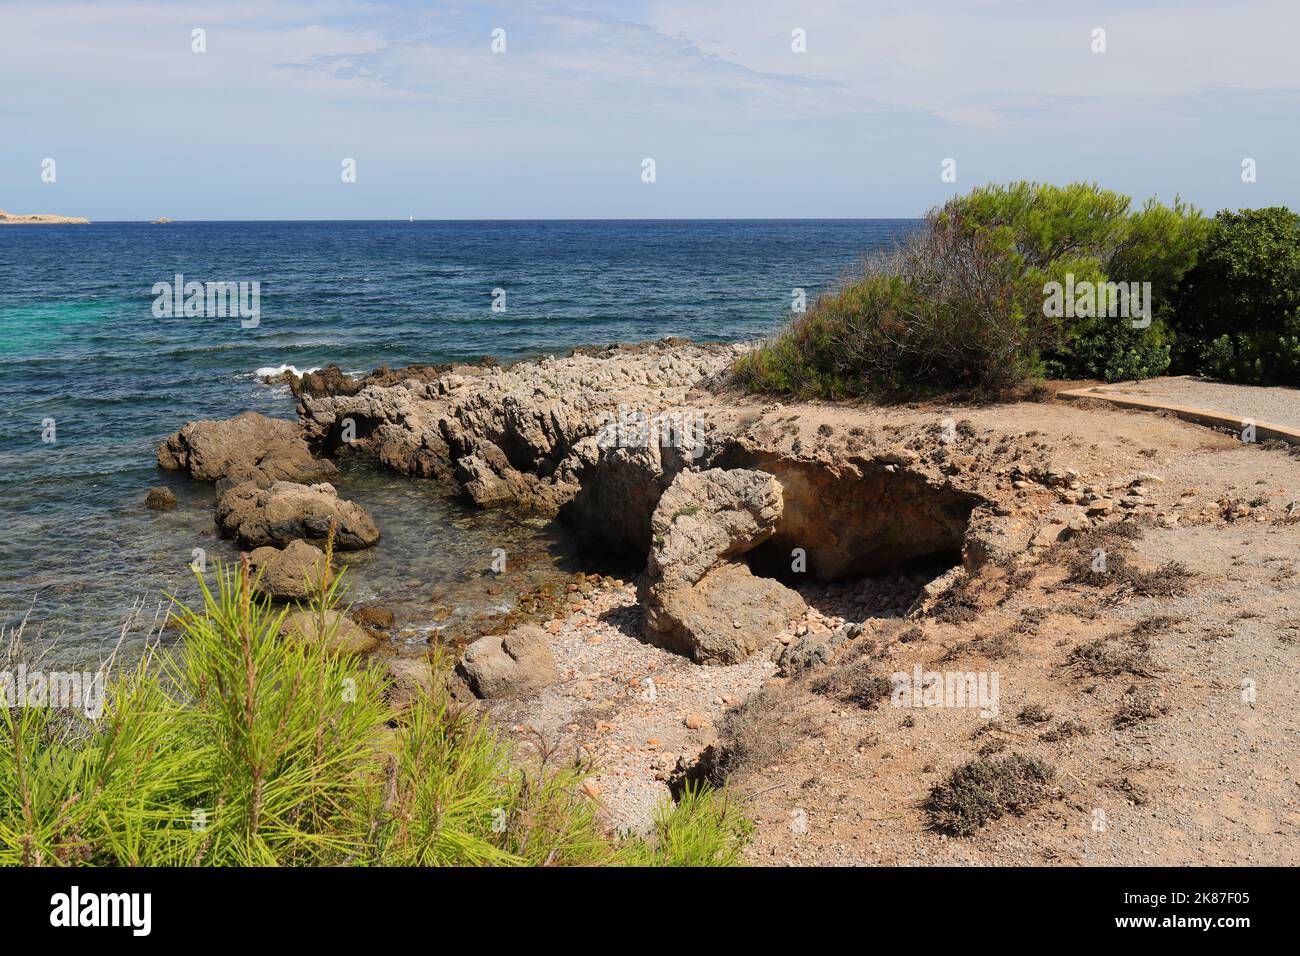 idyllic view of a rocky stretch of beach with green vegetation in the foreground and background, Cala Ratjada, Mallorca Stock Photo